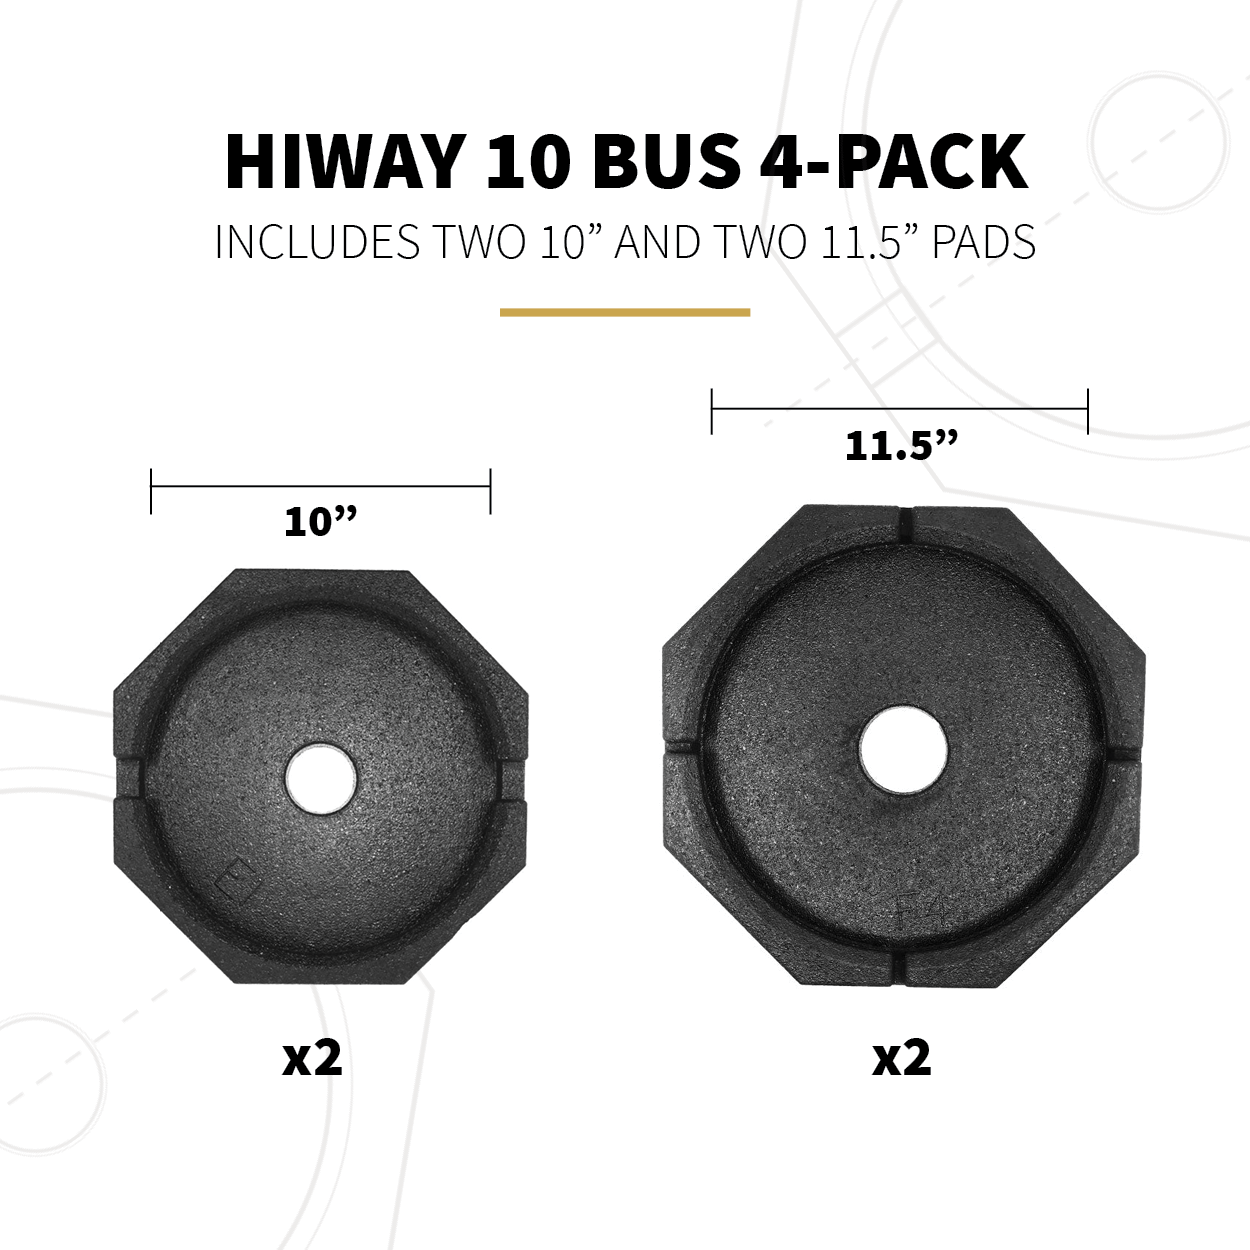 HiWay 10 Bus 4-Pack Specs